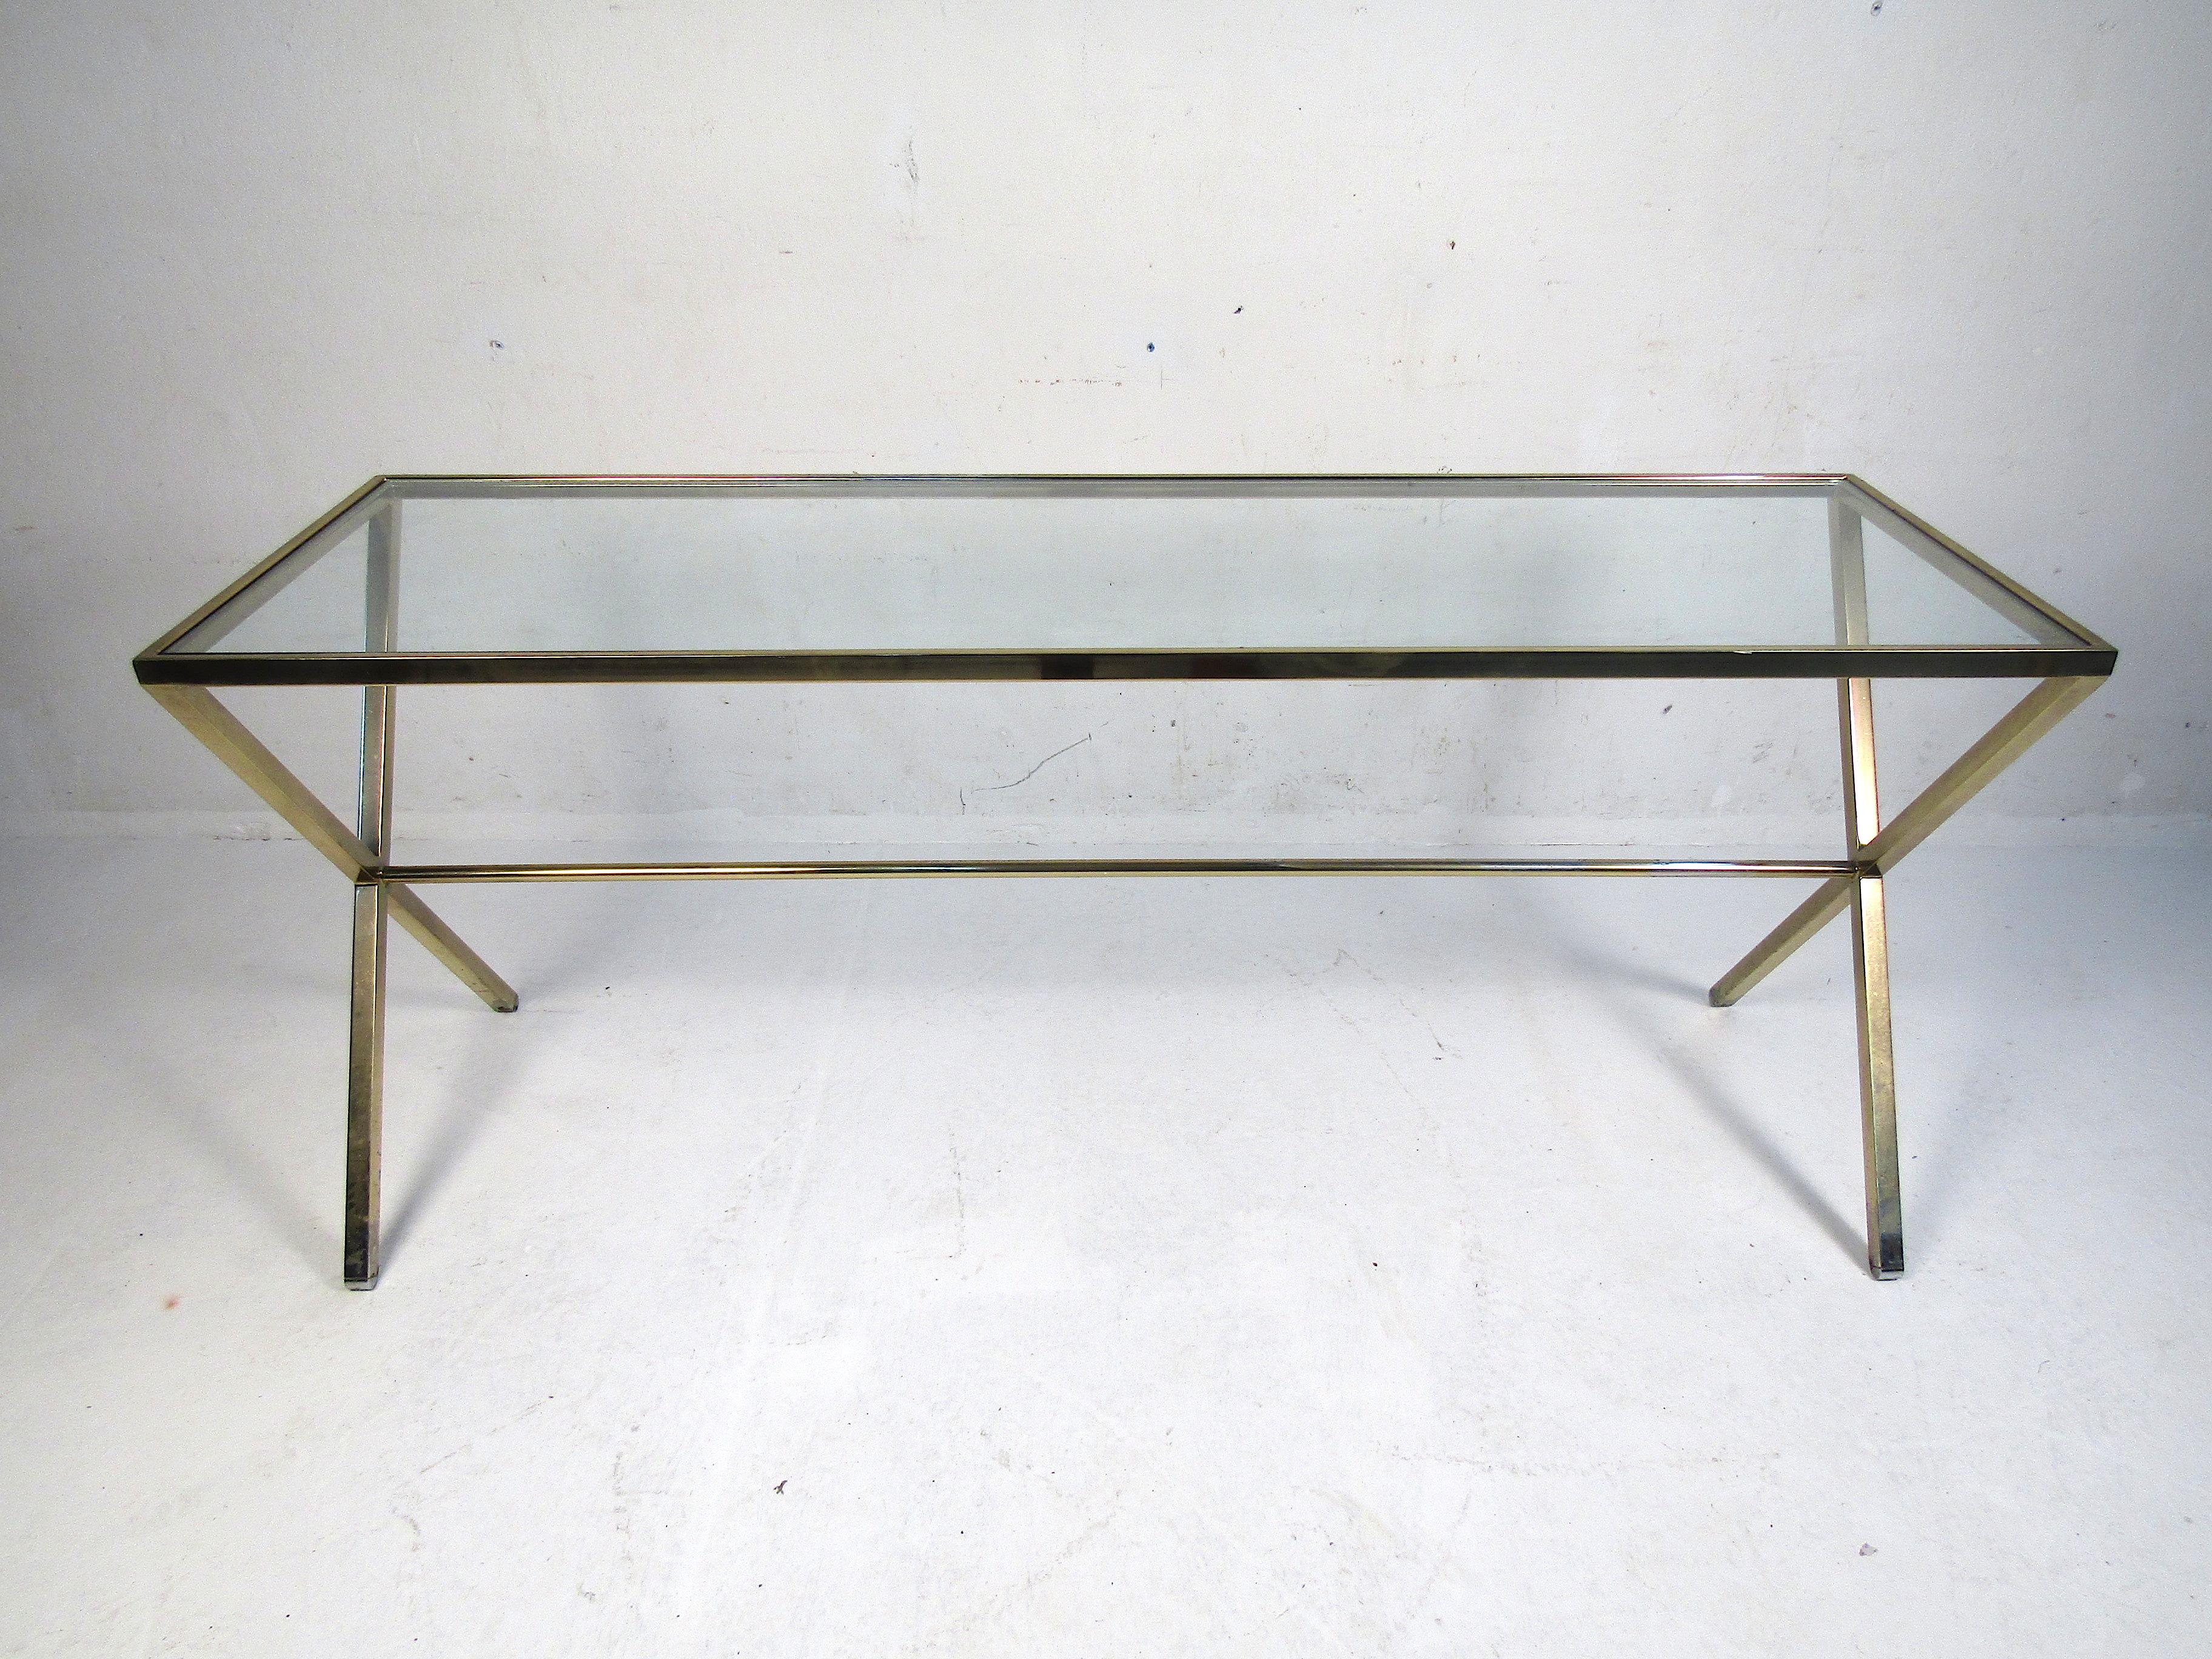 Vintage mid-century style console table with a brass colored frame and a glass insert serving as the tabletop. Interesting design with an X-base and a stretcher running across the underside. Please confirm item location with dealer (NJ or NY).